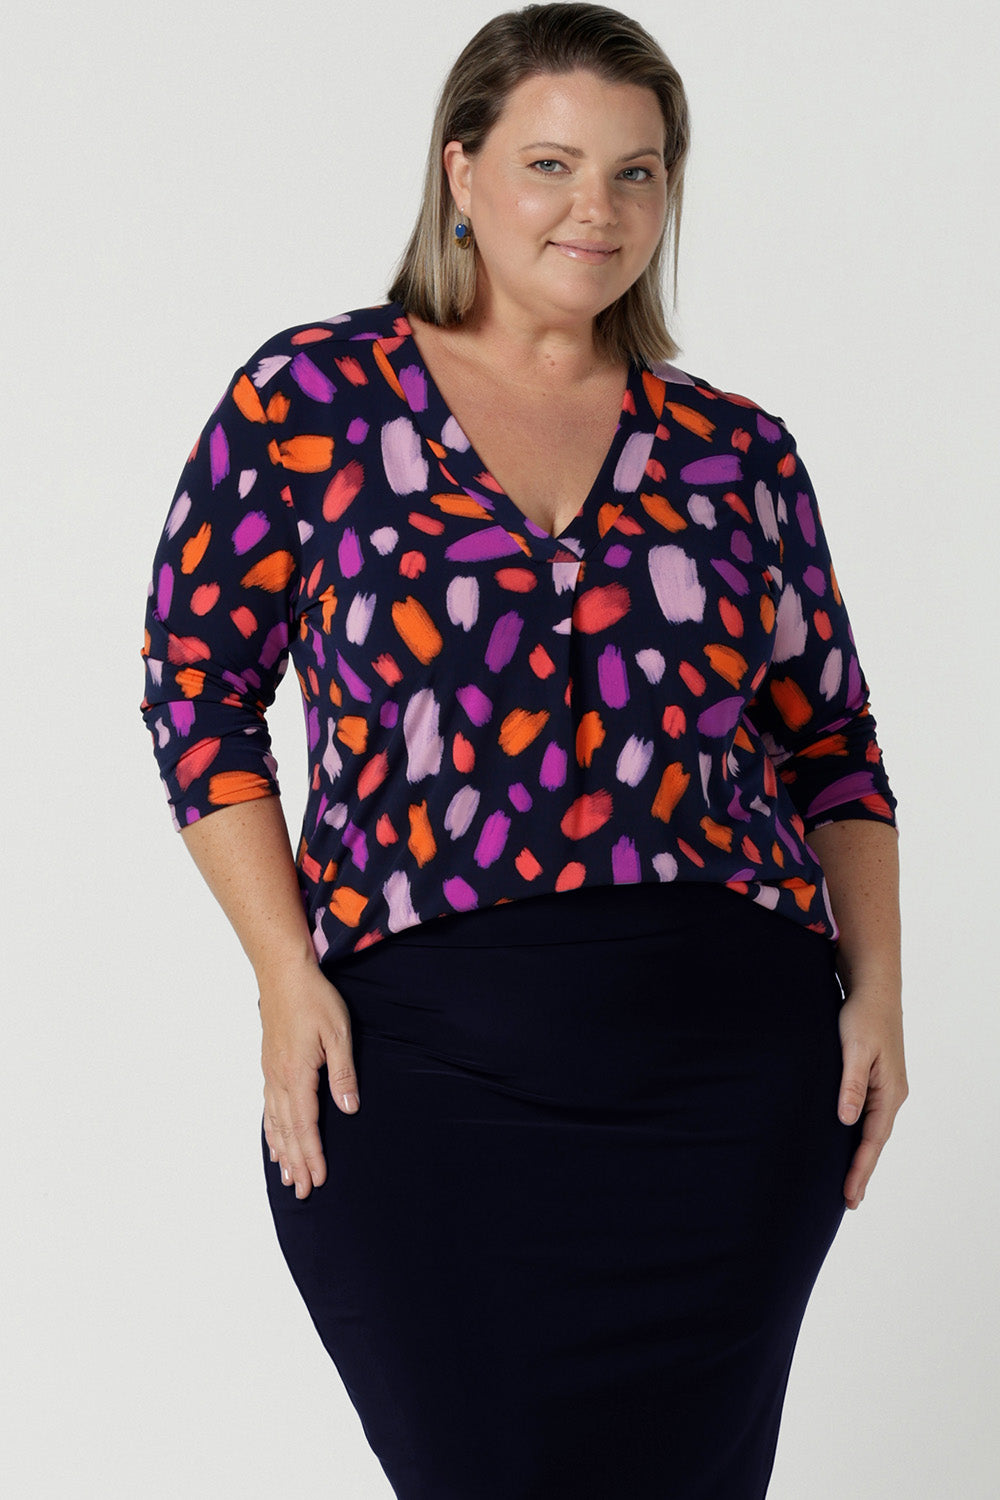 Size 18 curvy woman wears the Jaime top in Palette. A brush stroke inspired abstract print on a navy base with fuchsia, red, orange and pink spots. A v-neck pleat front top great for work to weekend. Comfortable jersey and easy care. Made in Australia for women size 8 - 24.